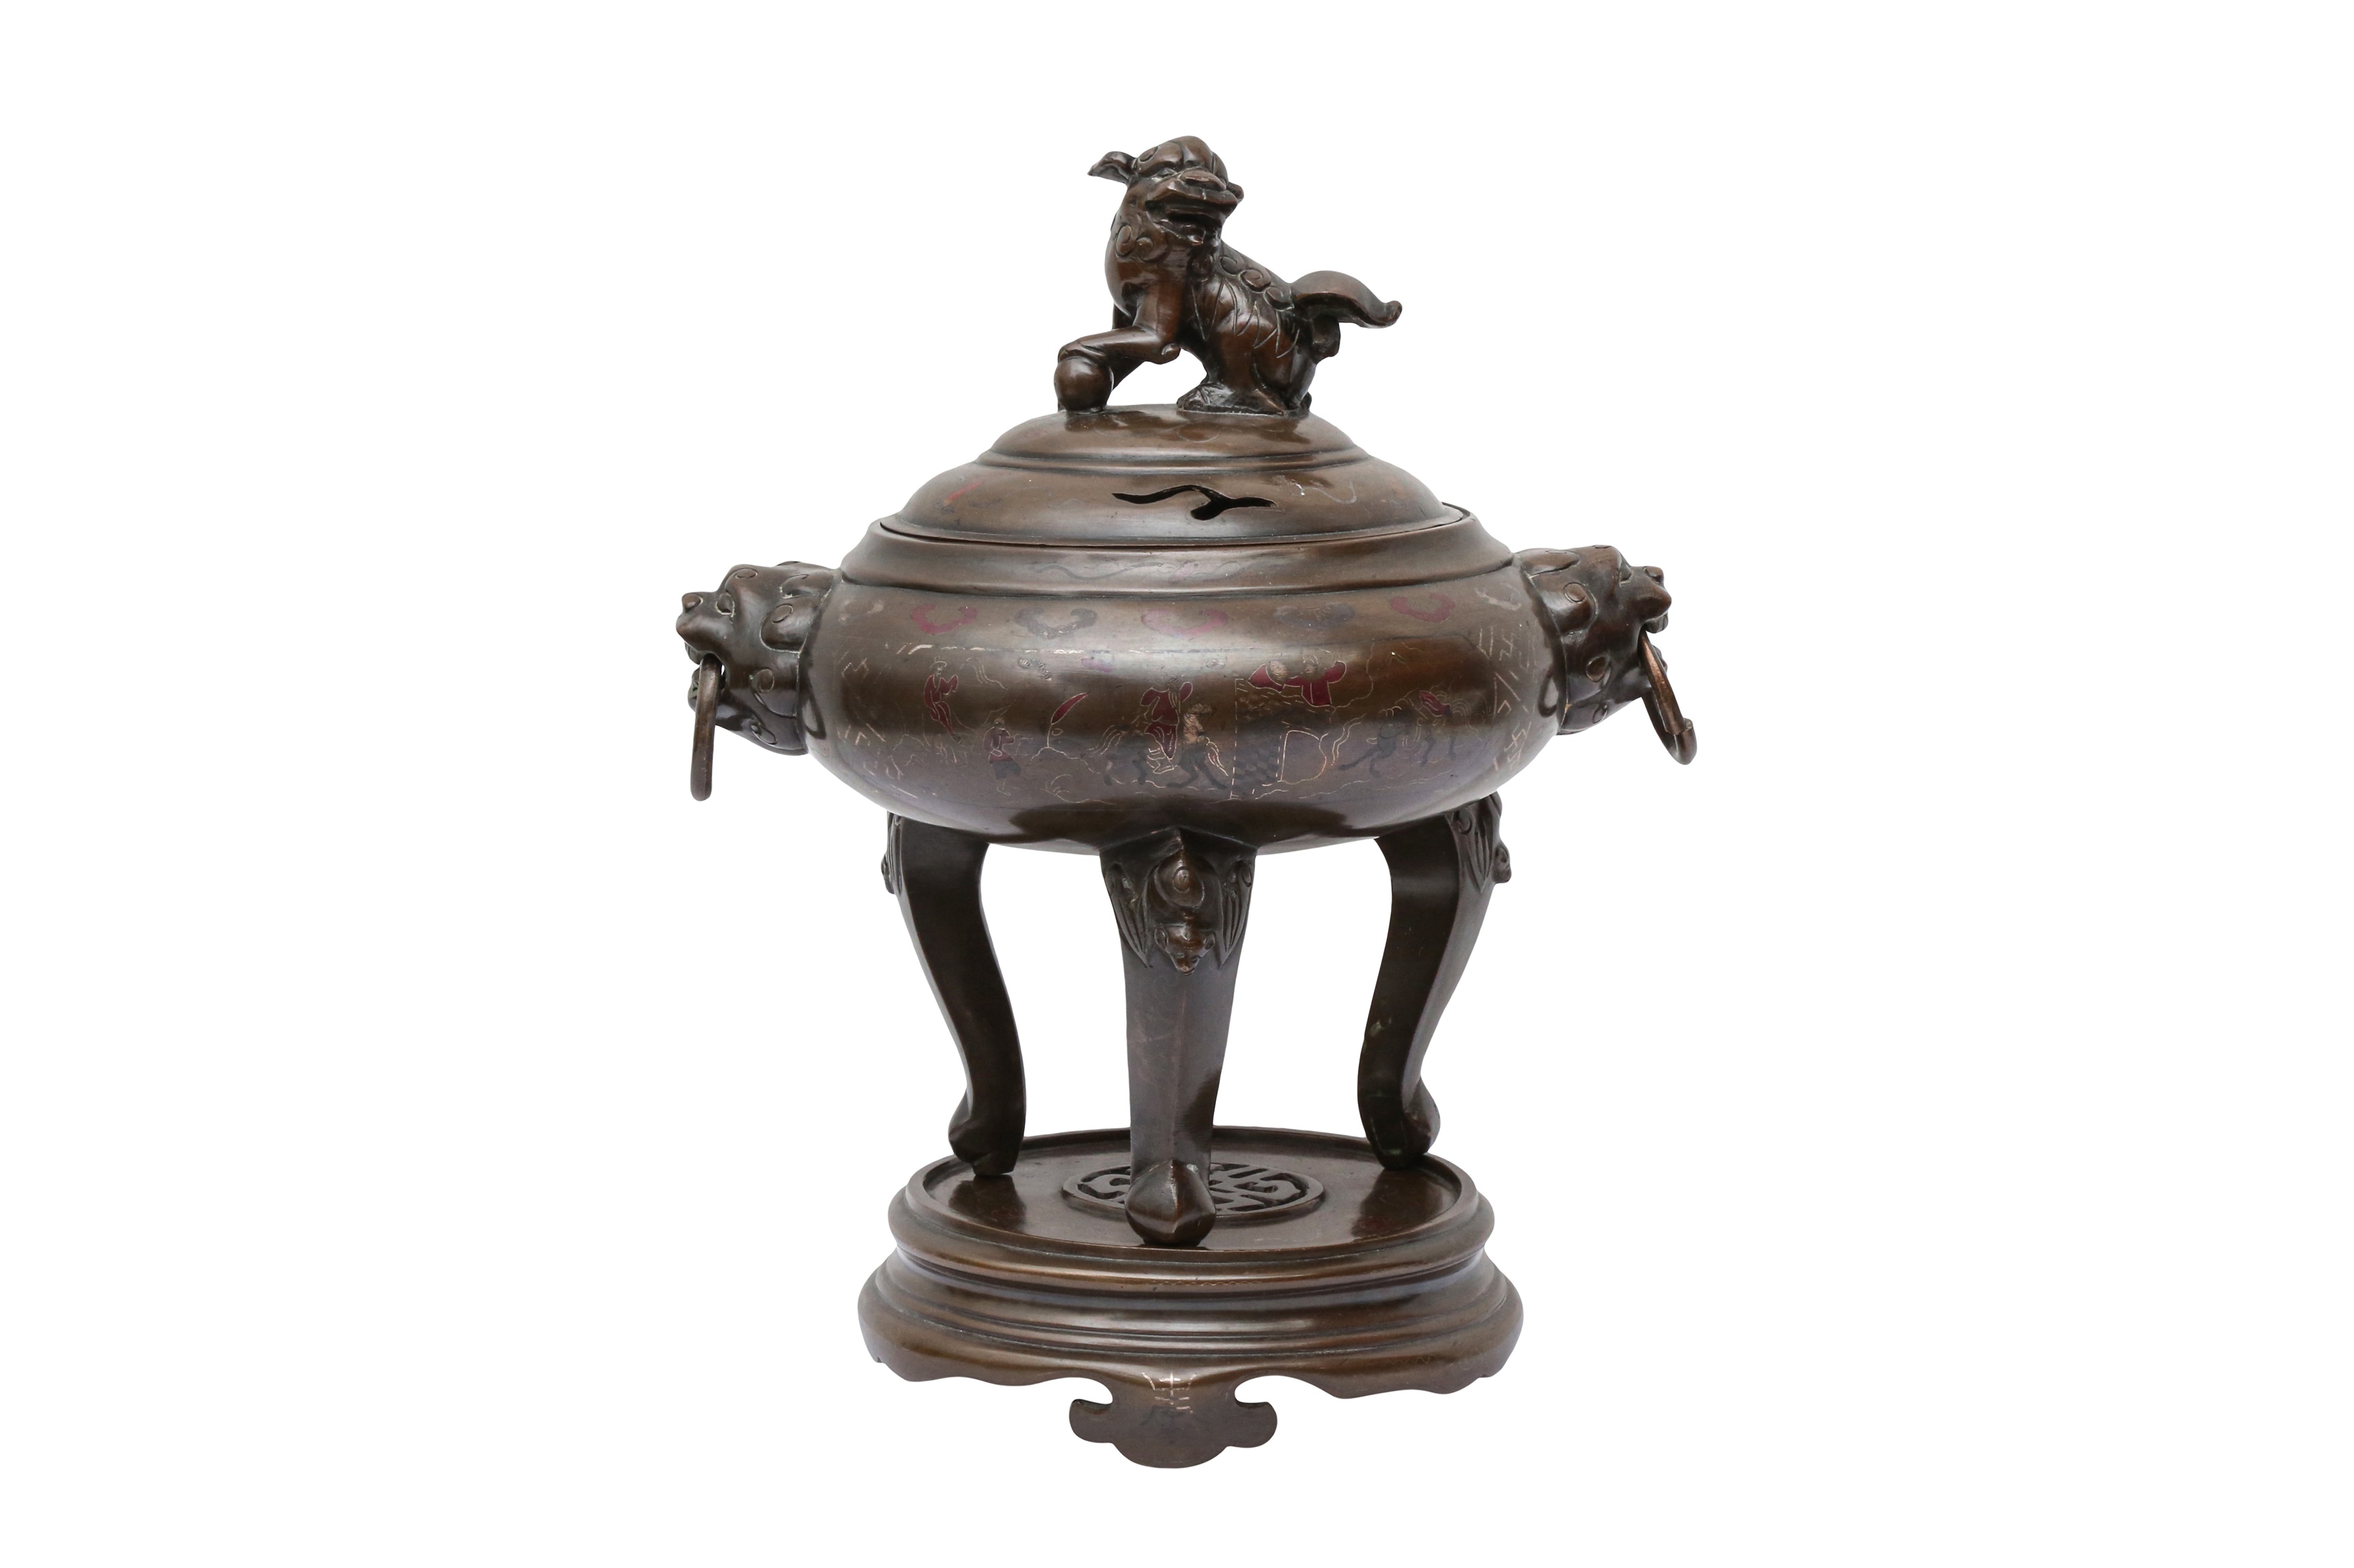 A VIETNAMESE SILVER- AND COPPER-INLAID BRONZE CENSER, COVER AND STAND - Image 2 of 2